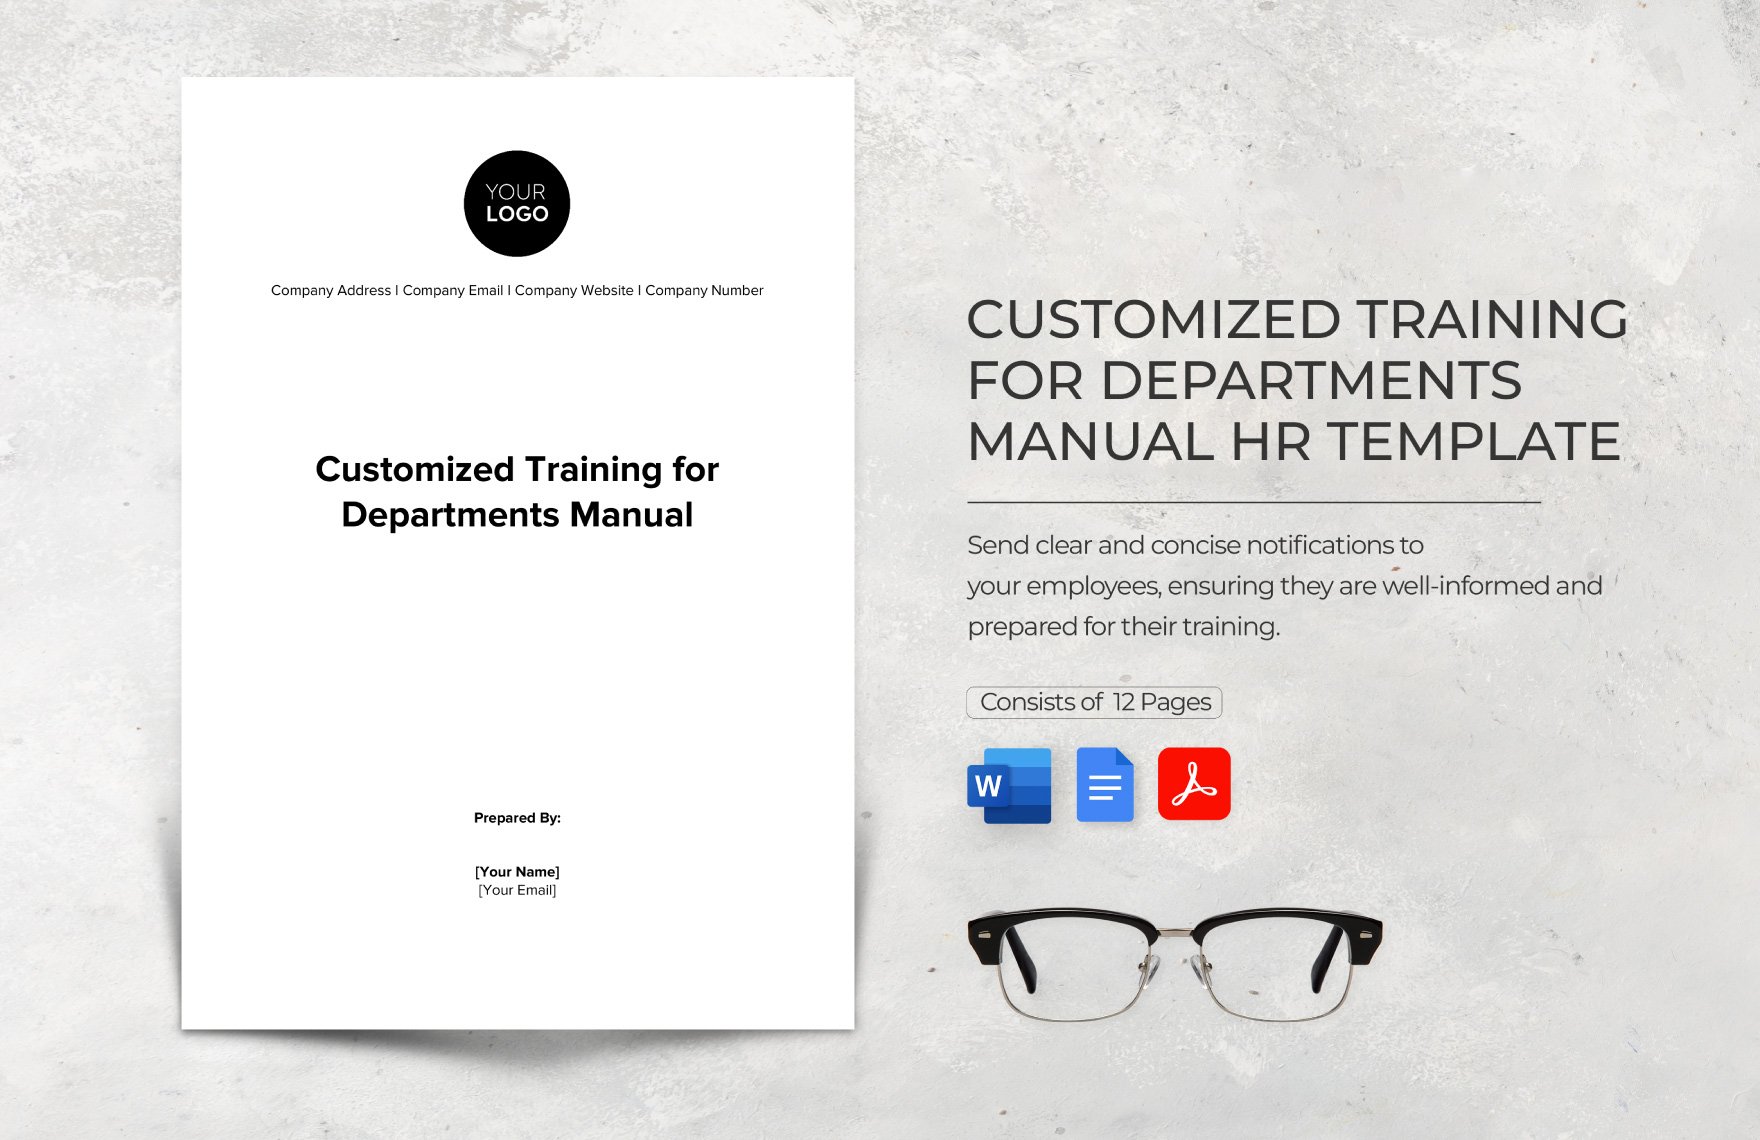 Customized Training for Departments Manual HR Template in Word, Google Docs, PDF